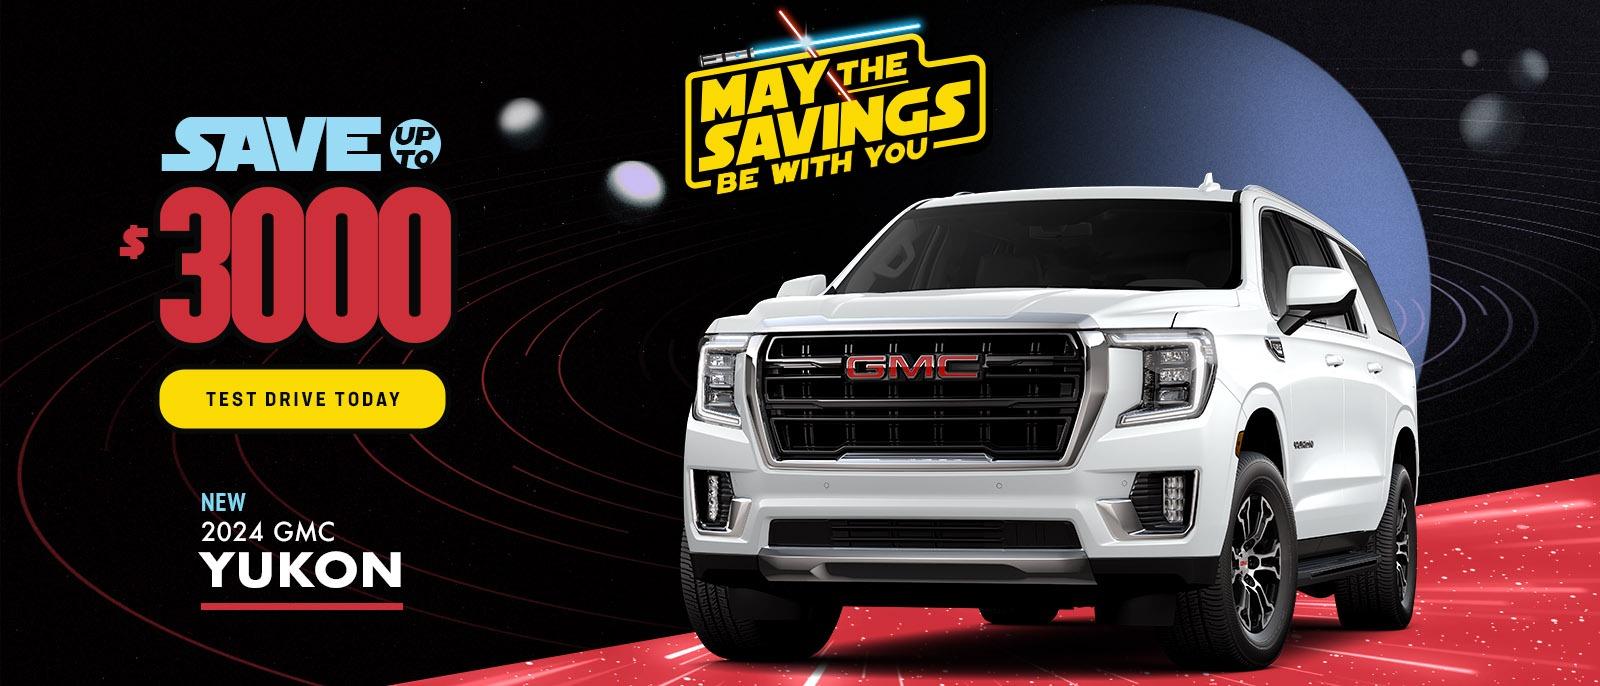 2024 GMC Yukon Save Up To $3000 Off MSRP